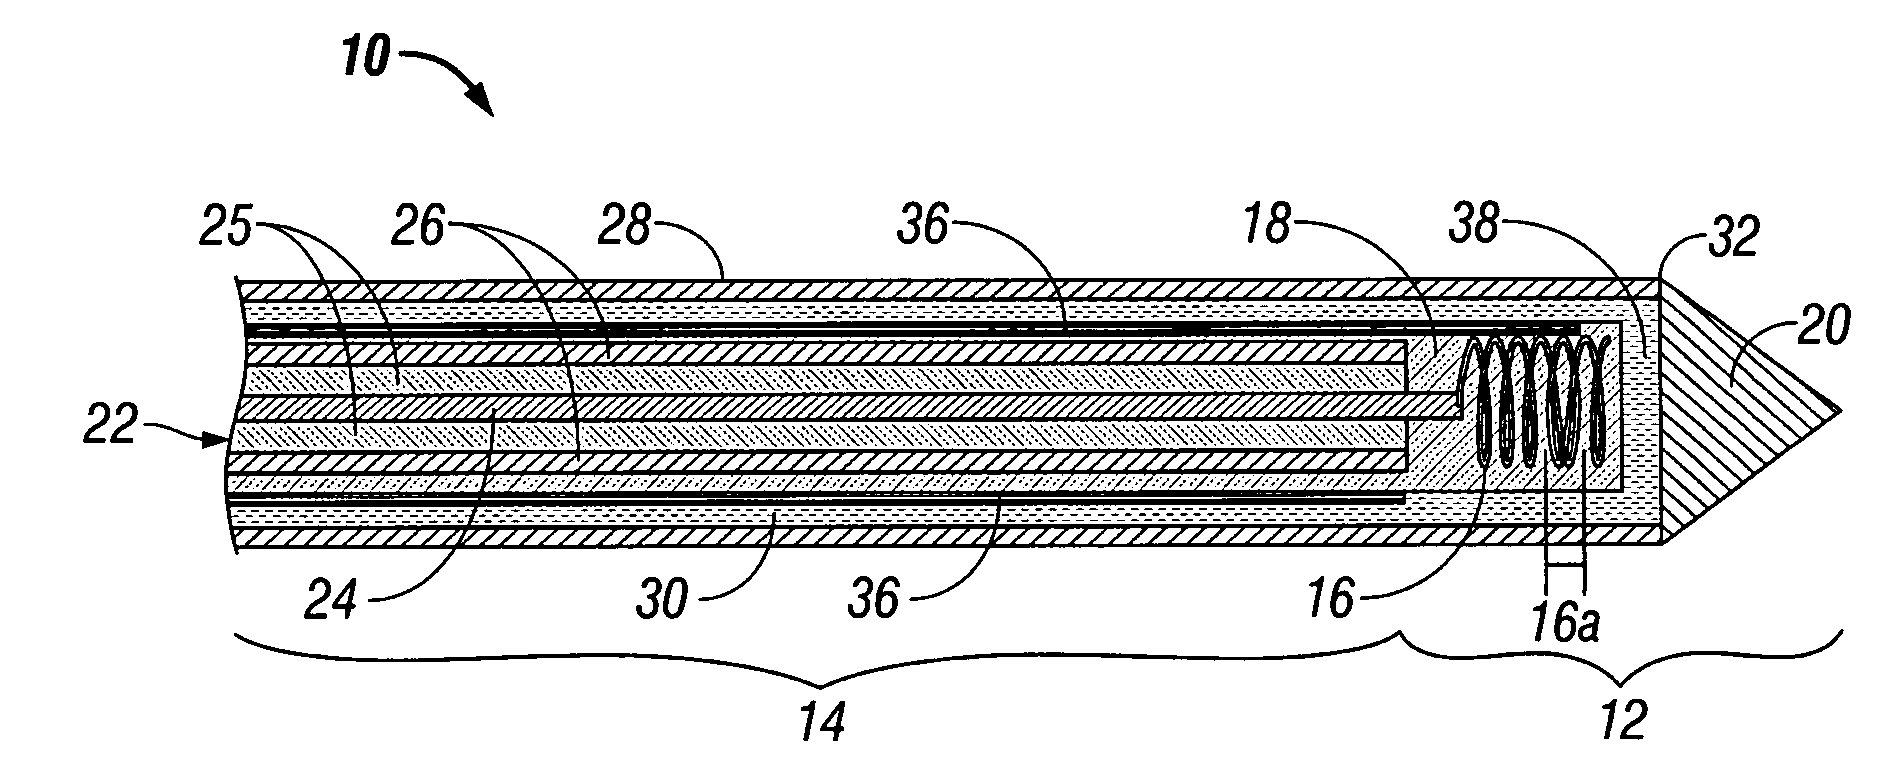 Cooled helical antenna for microwave ablation